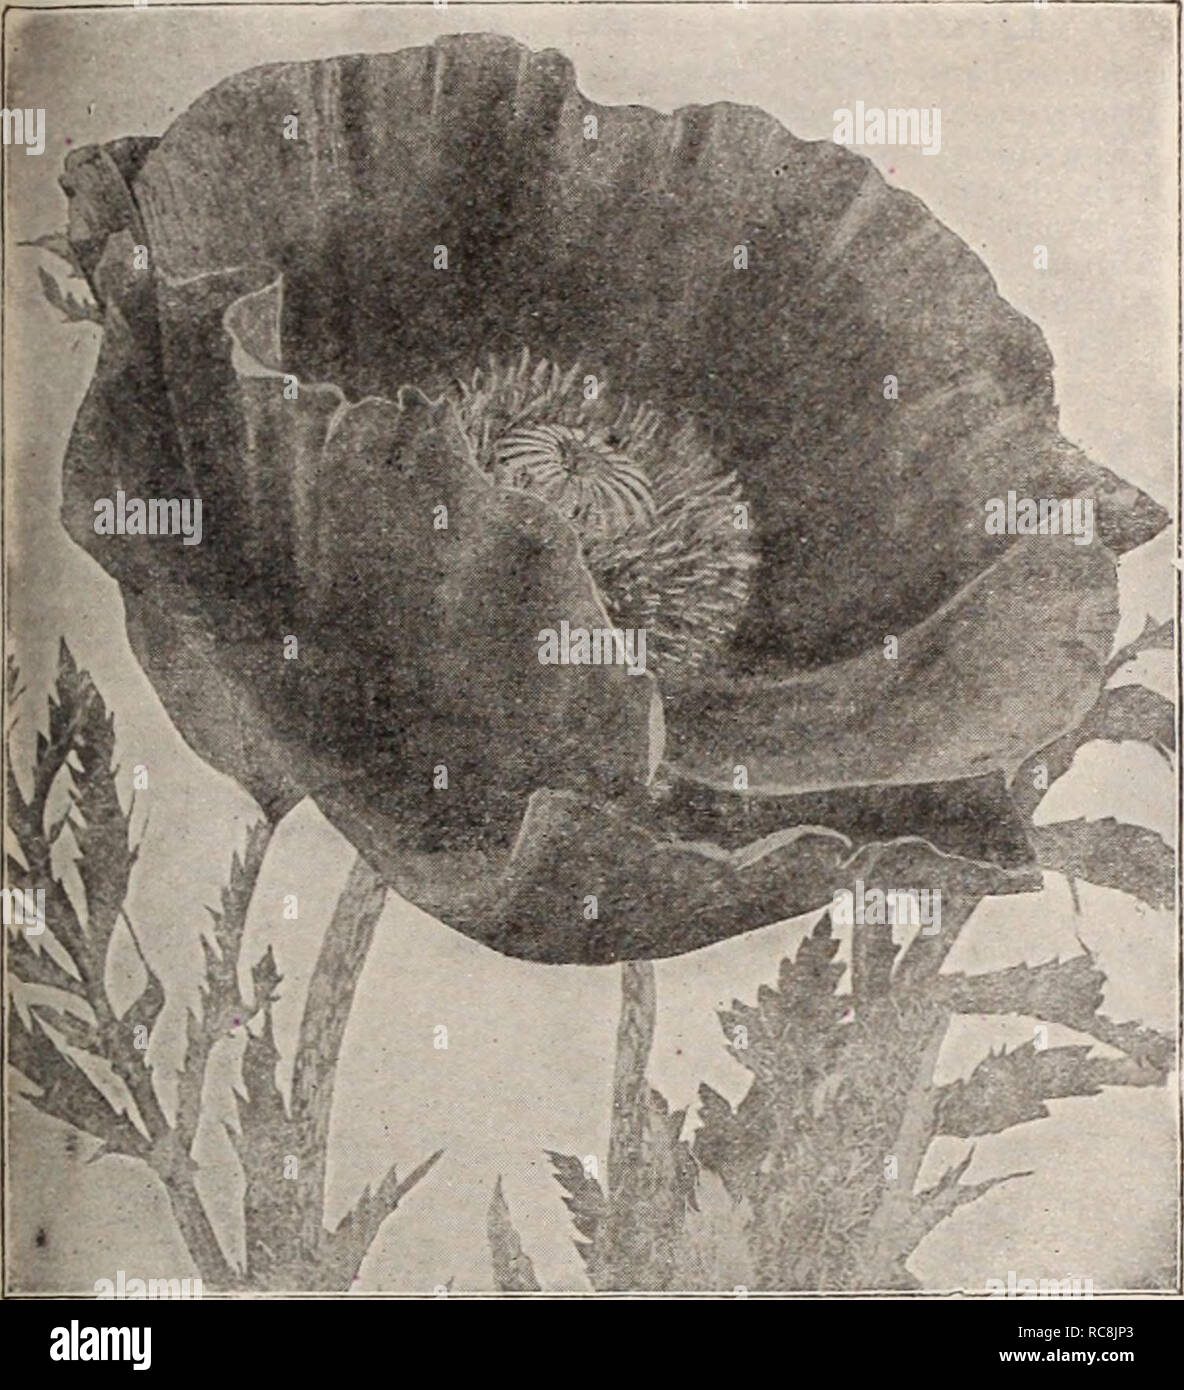 . Dreer's garden book / Henry A. Dreer.. Nursery Catalogue. x HARDY PERENNIAL PIANTS / 187. Papaver Orientalis (Oriental Poppy) Pachysandra (Japanese Spurge) Terminalis. A trailing plant, 6 to 8 inches high, forming broad mats of bright, glossy green foliage and small spikes of flowers during May and June; invaluable as a cover plant either in sun or shade. 25 cts. each; $2.00 per doz.; $15.00 per 100; $120.00 per 1000. Hardy Garden Pinks Dianthus Plumarius (Scotch Pinks) Old favorites, bearing their sweet, clove-scented double flowers in the greatest profusion during May and June. They are in Stock Photo